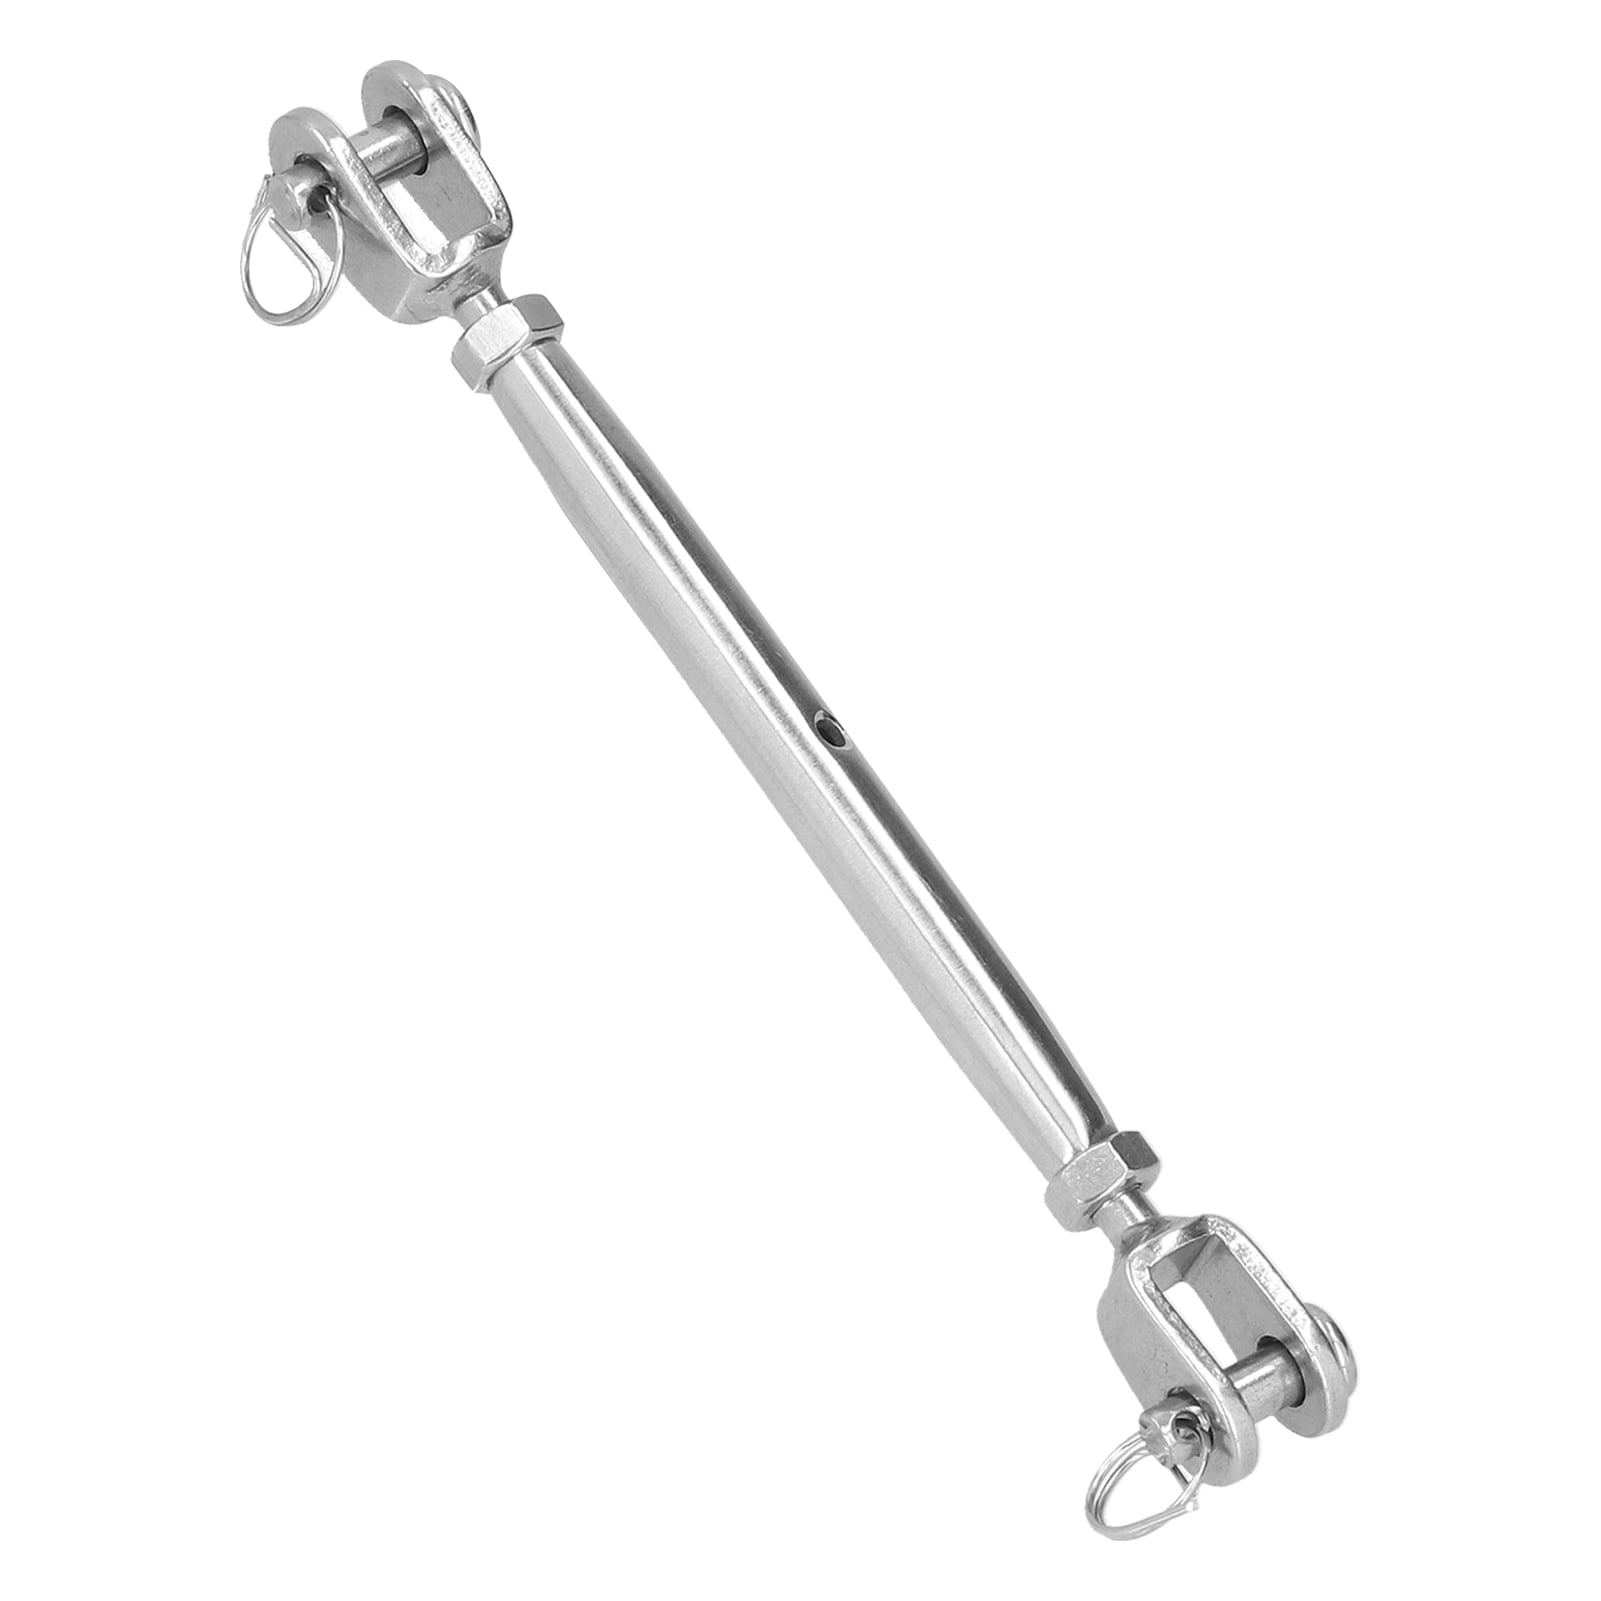 1/2" Marine 304 Stainless Steel Jaw/Jaw Closed Body Turnbuckle Rigging Screw 